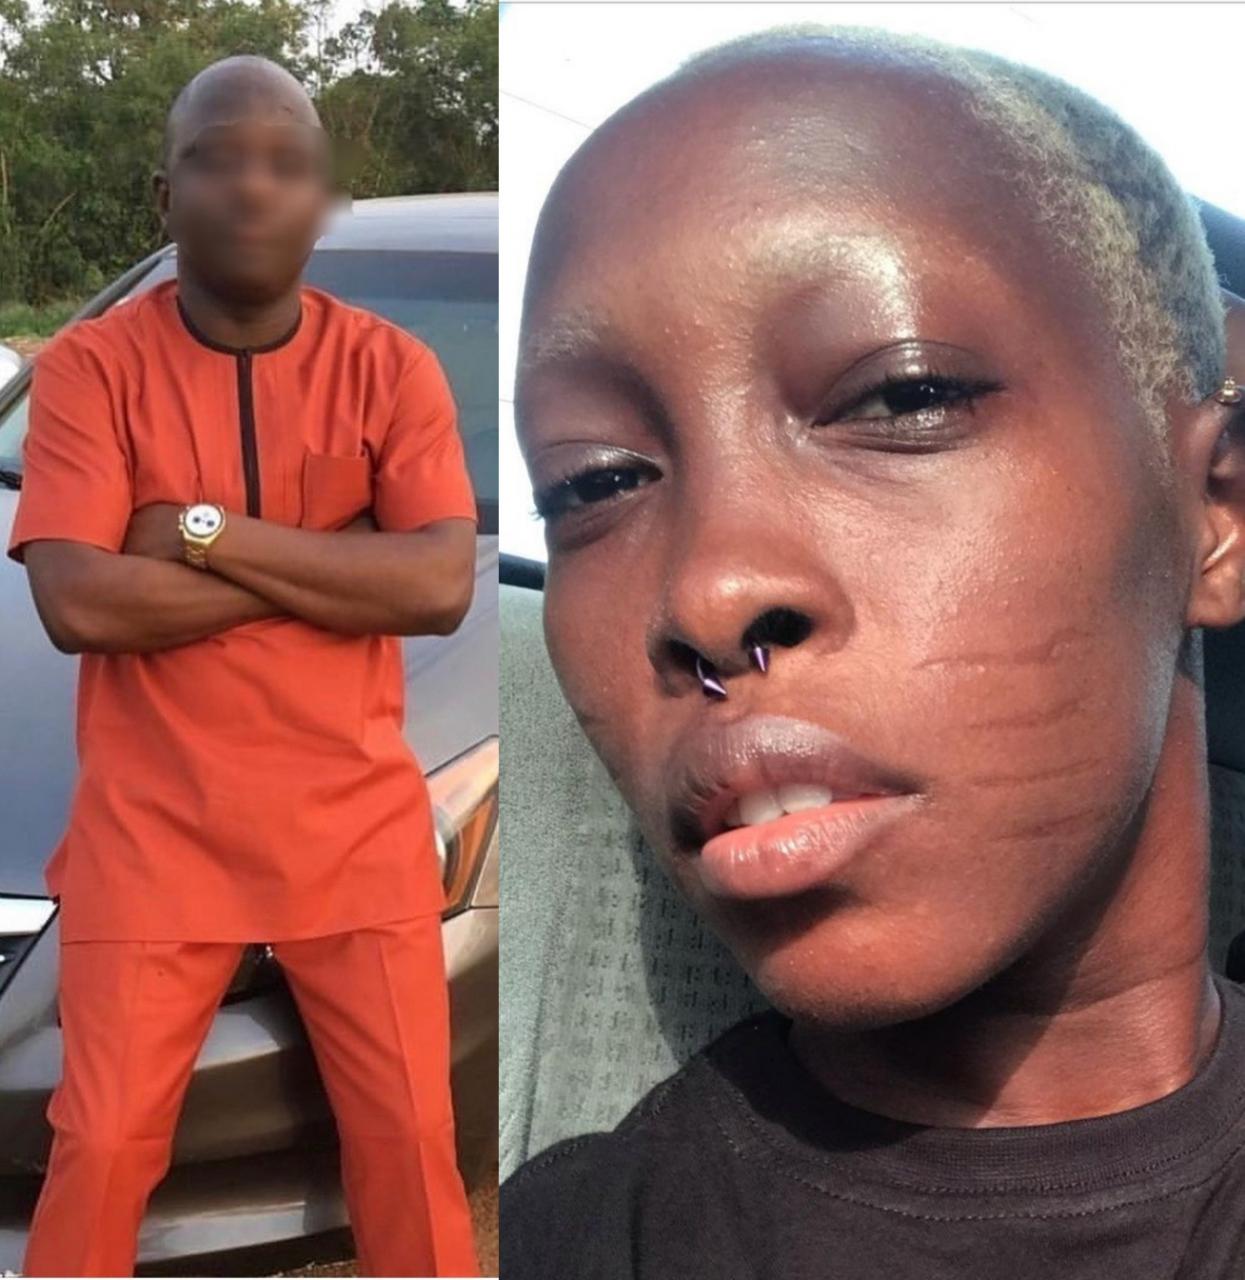 Adetutu OJ exposes chat with married man who offered to pay 500k for sex with her because he fantasies about sex with an 